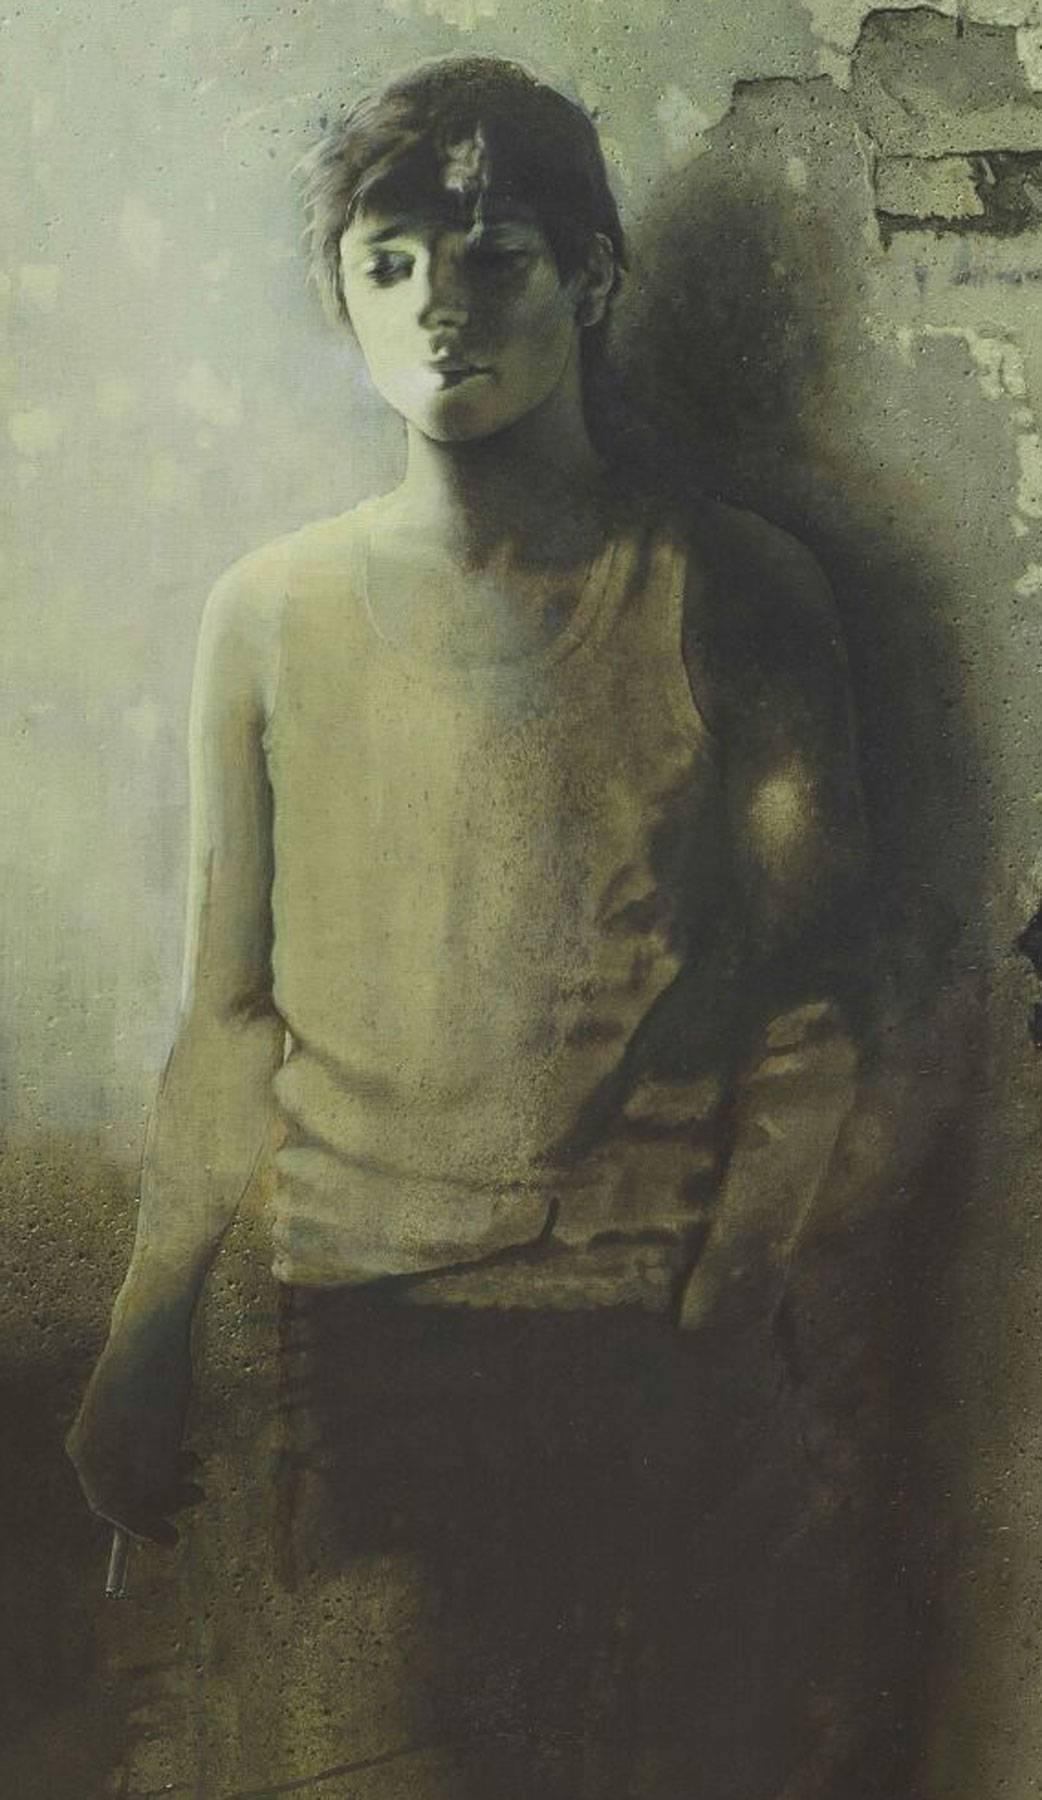 Unknown Destiny, Adolescent Boy in Green-Brown colored Canvas , Contemporary Art - Painting by Prasenjit Sengupta